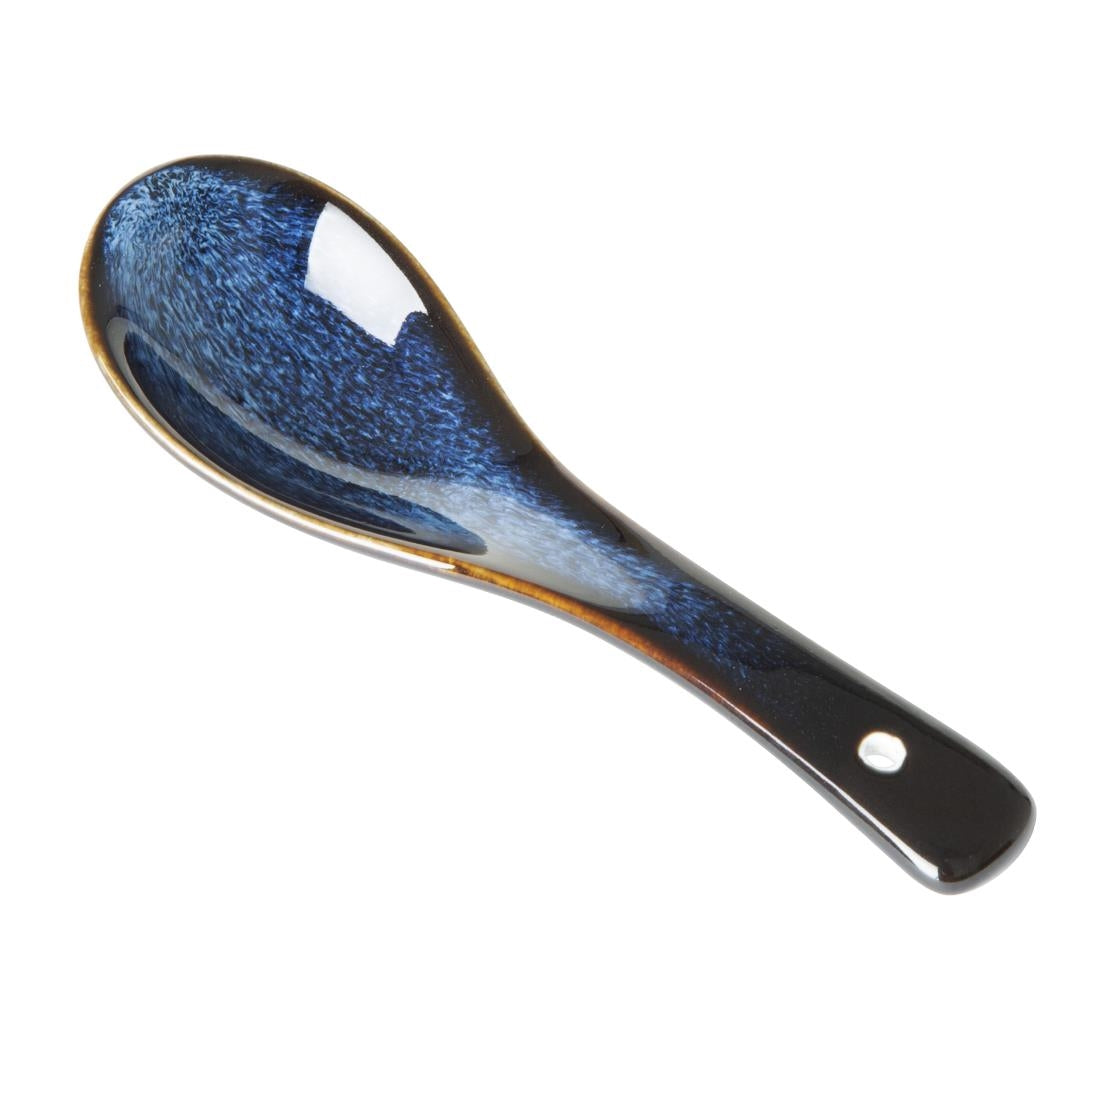 DZ771 Olympia Luna Midnight Blue Soup Spoons (Pack of 12)